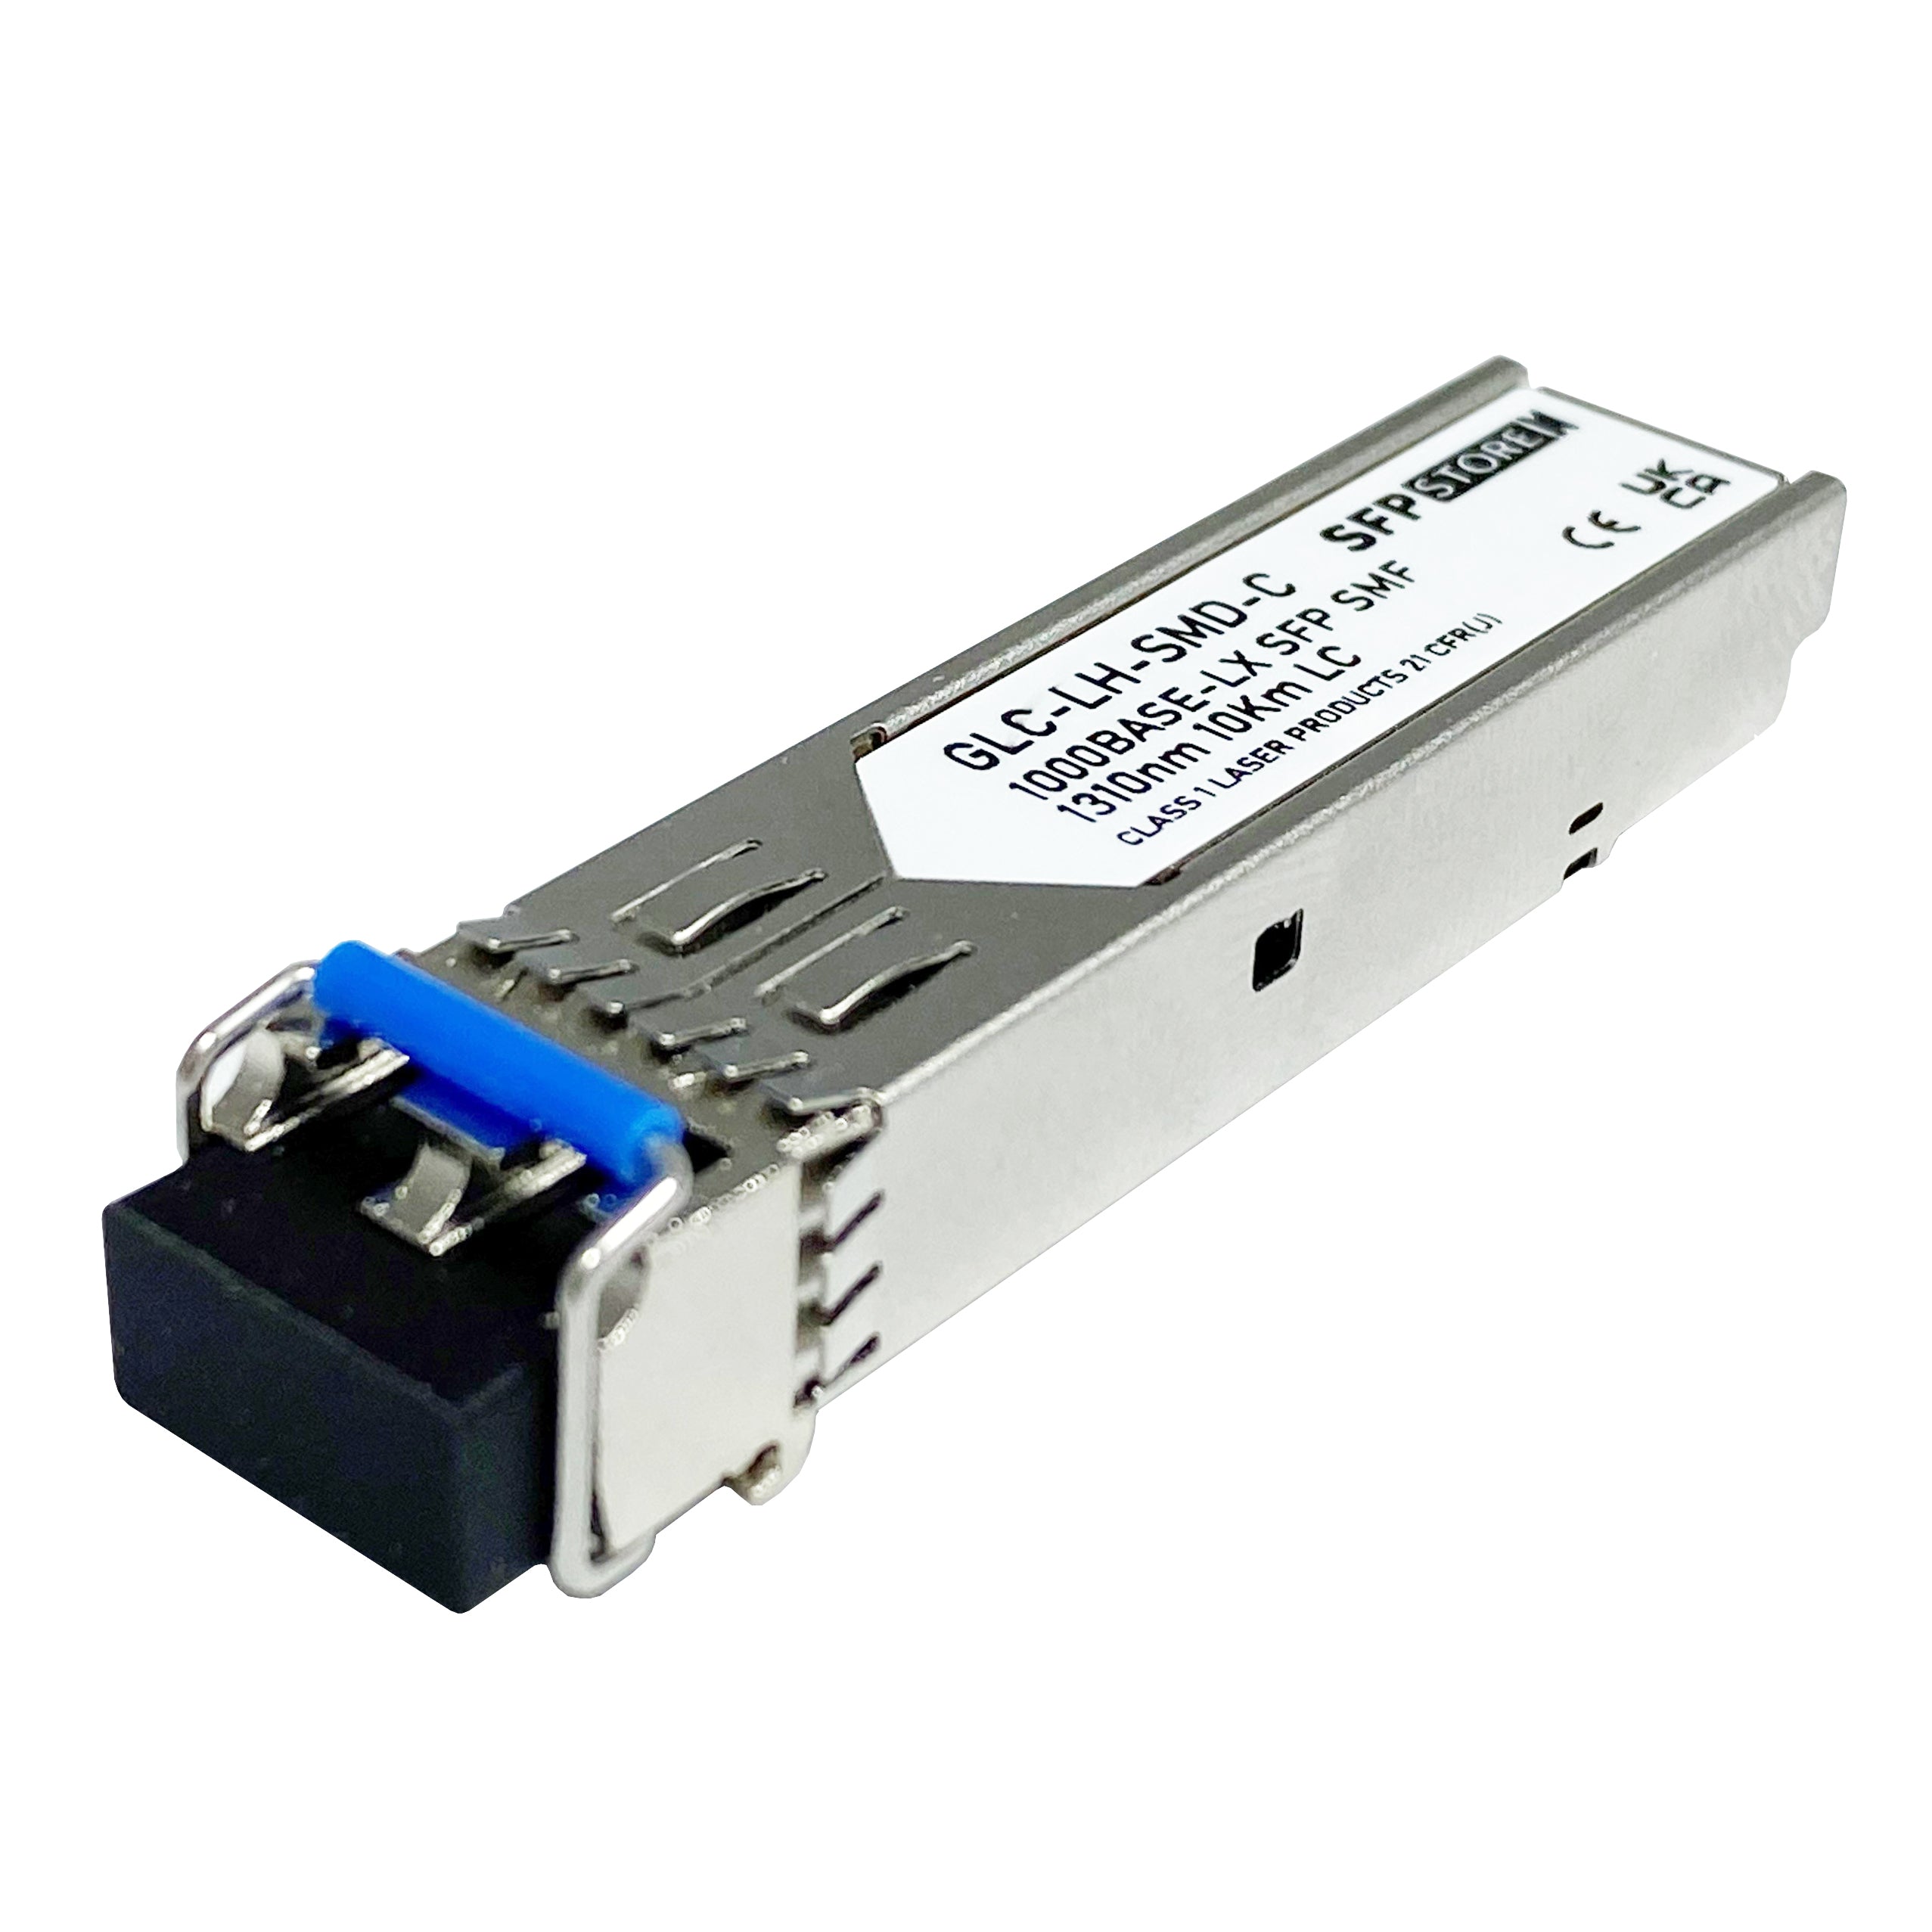 AT-SPLX10-C Allied Telesis Compatible 1G LX SFP LC Transceiver